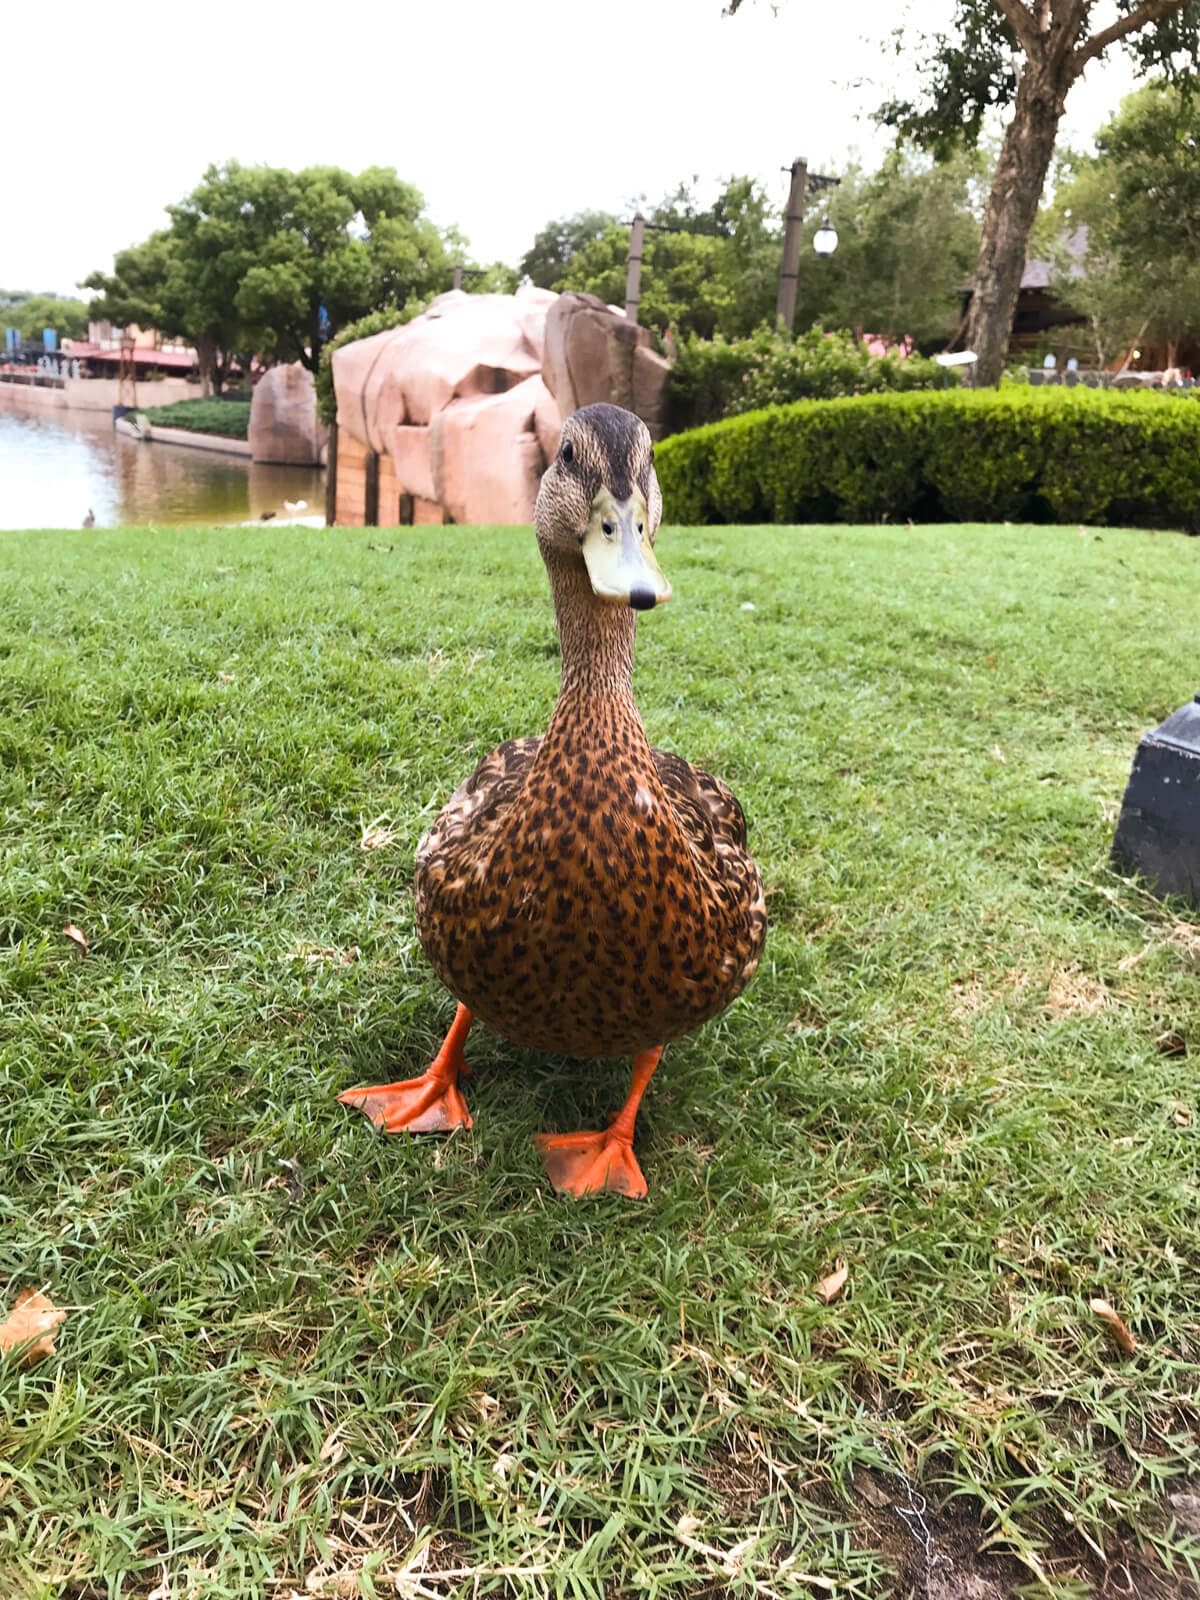 A close shot of a brown duck standing on green grass. It’s looking straight at the camera